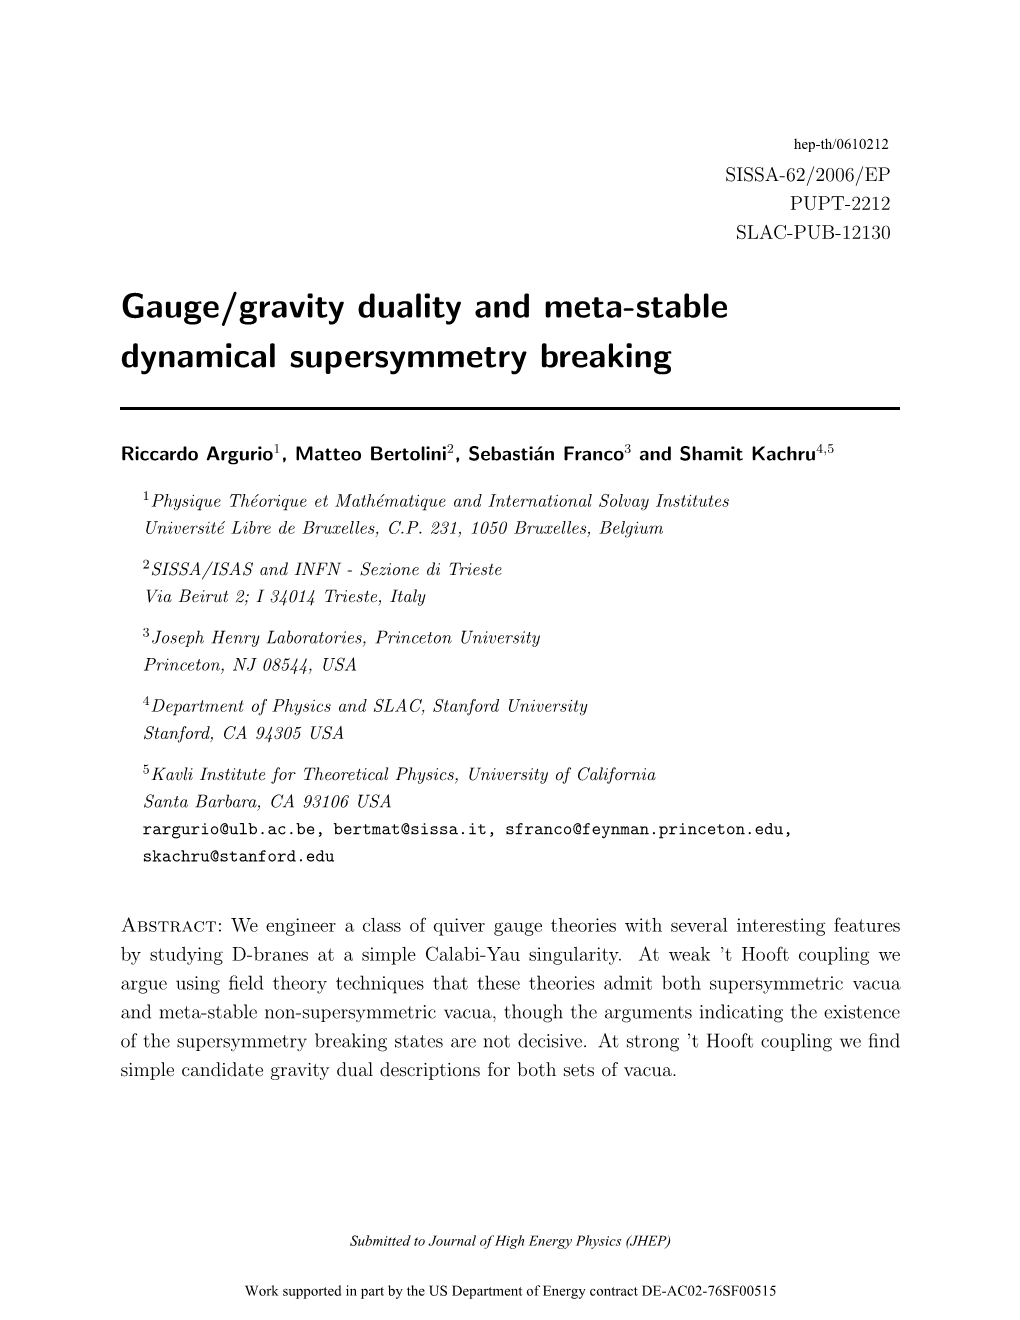 Gauge/Gravity Duality and Meta-Stable Dynamical Supersymmetry Breaking